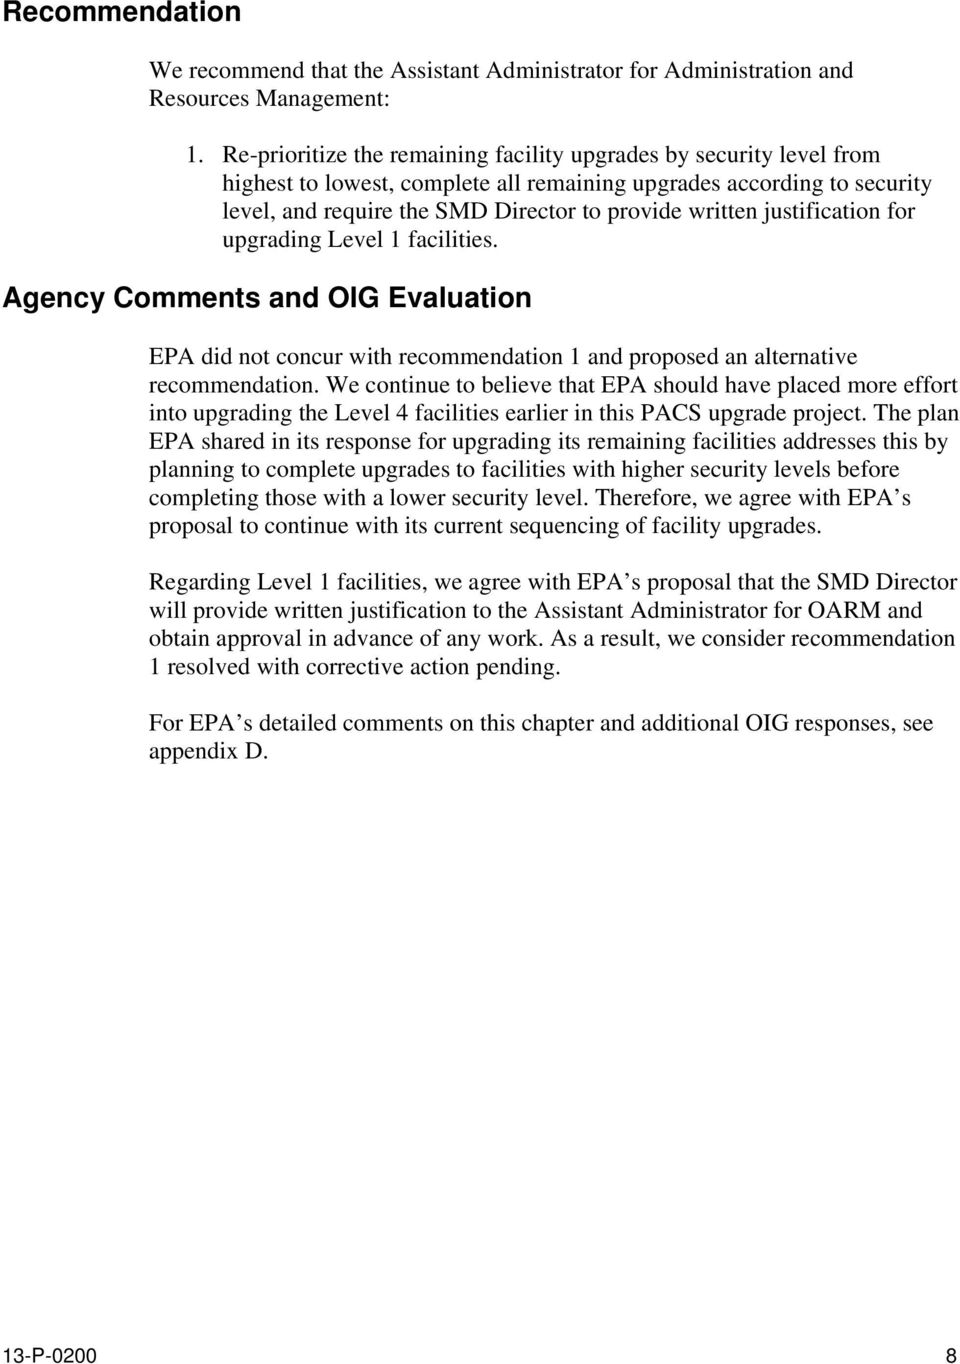 justification for upgrading Level 1 facilities. Agency Comments and OIG Evaluation EPA did not concur with recommendation 1 and proposed an alternative recommendation.